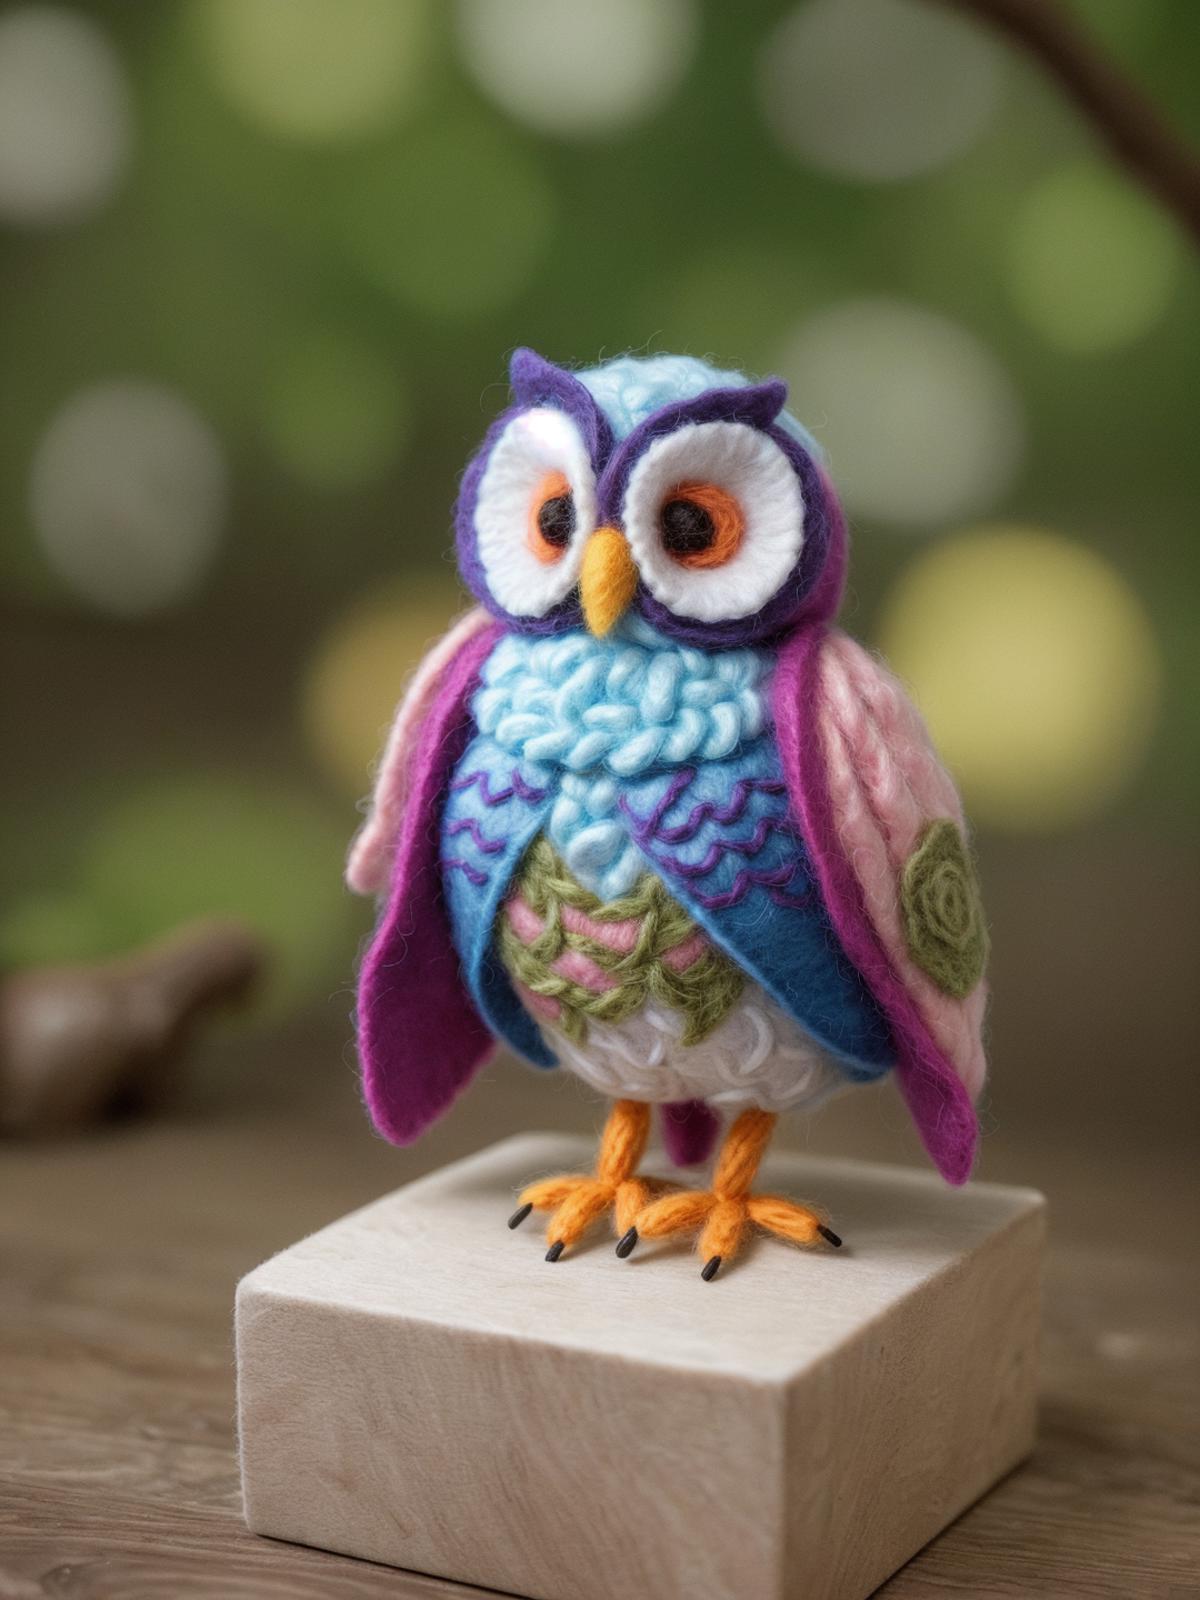 A purple and white crocheted owl sitting on a wooden stand.